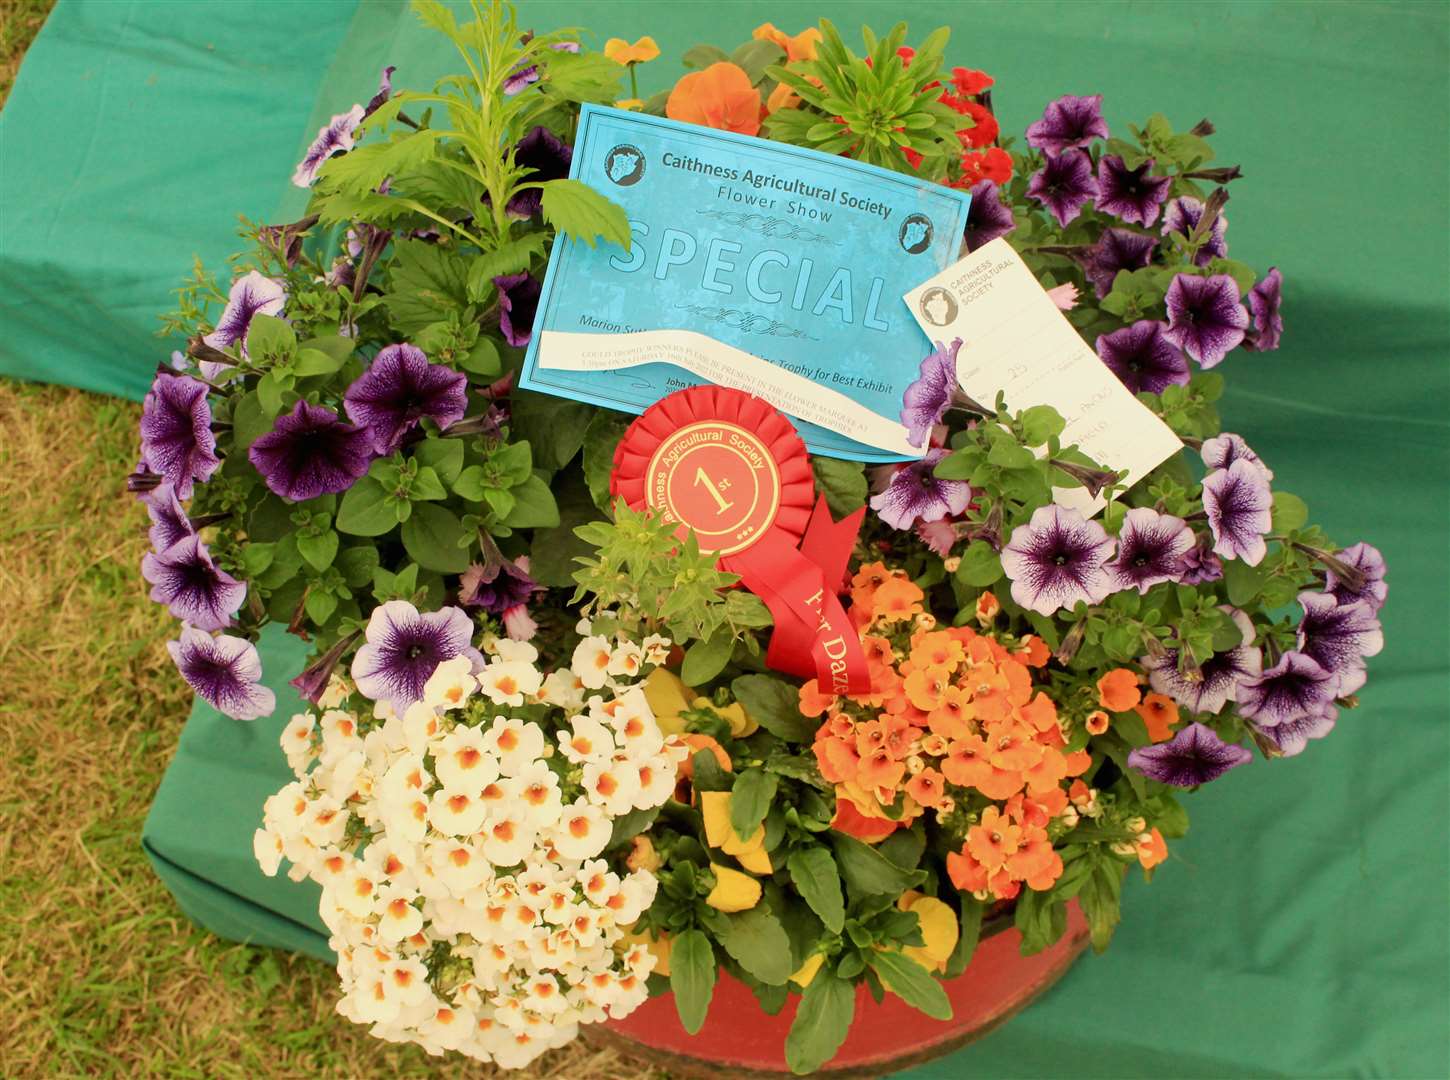 Isobel Angus's prize-winning patio planter in the flower tent.